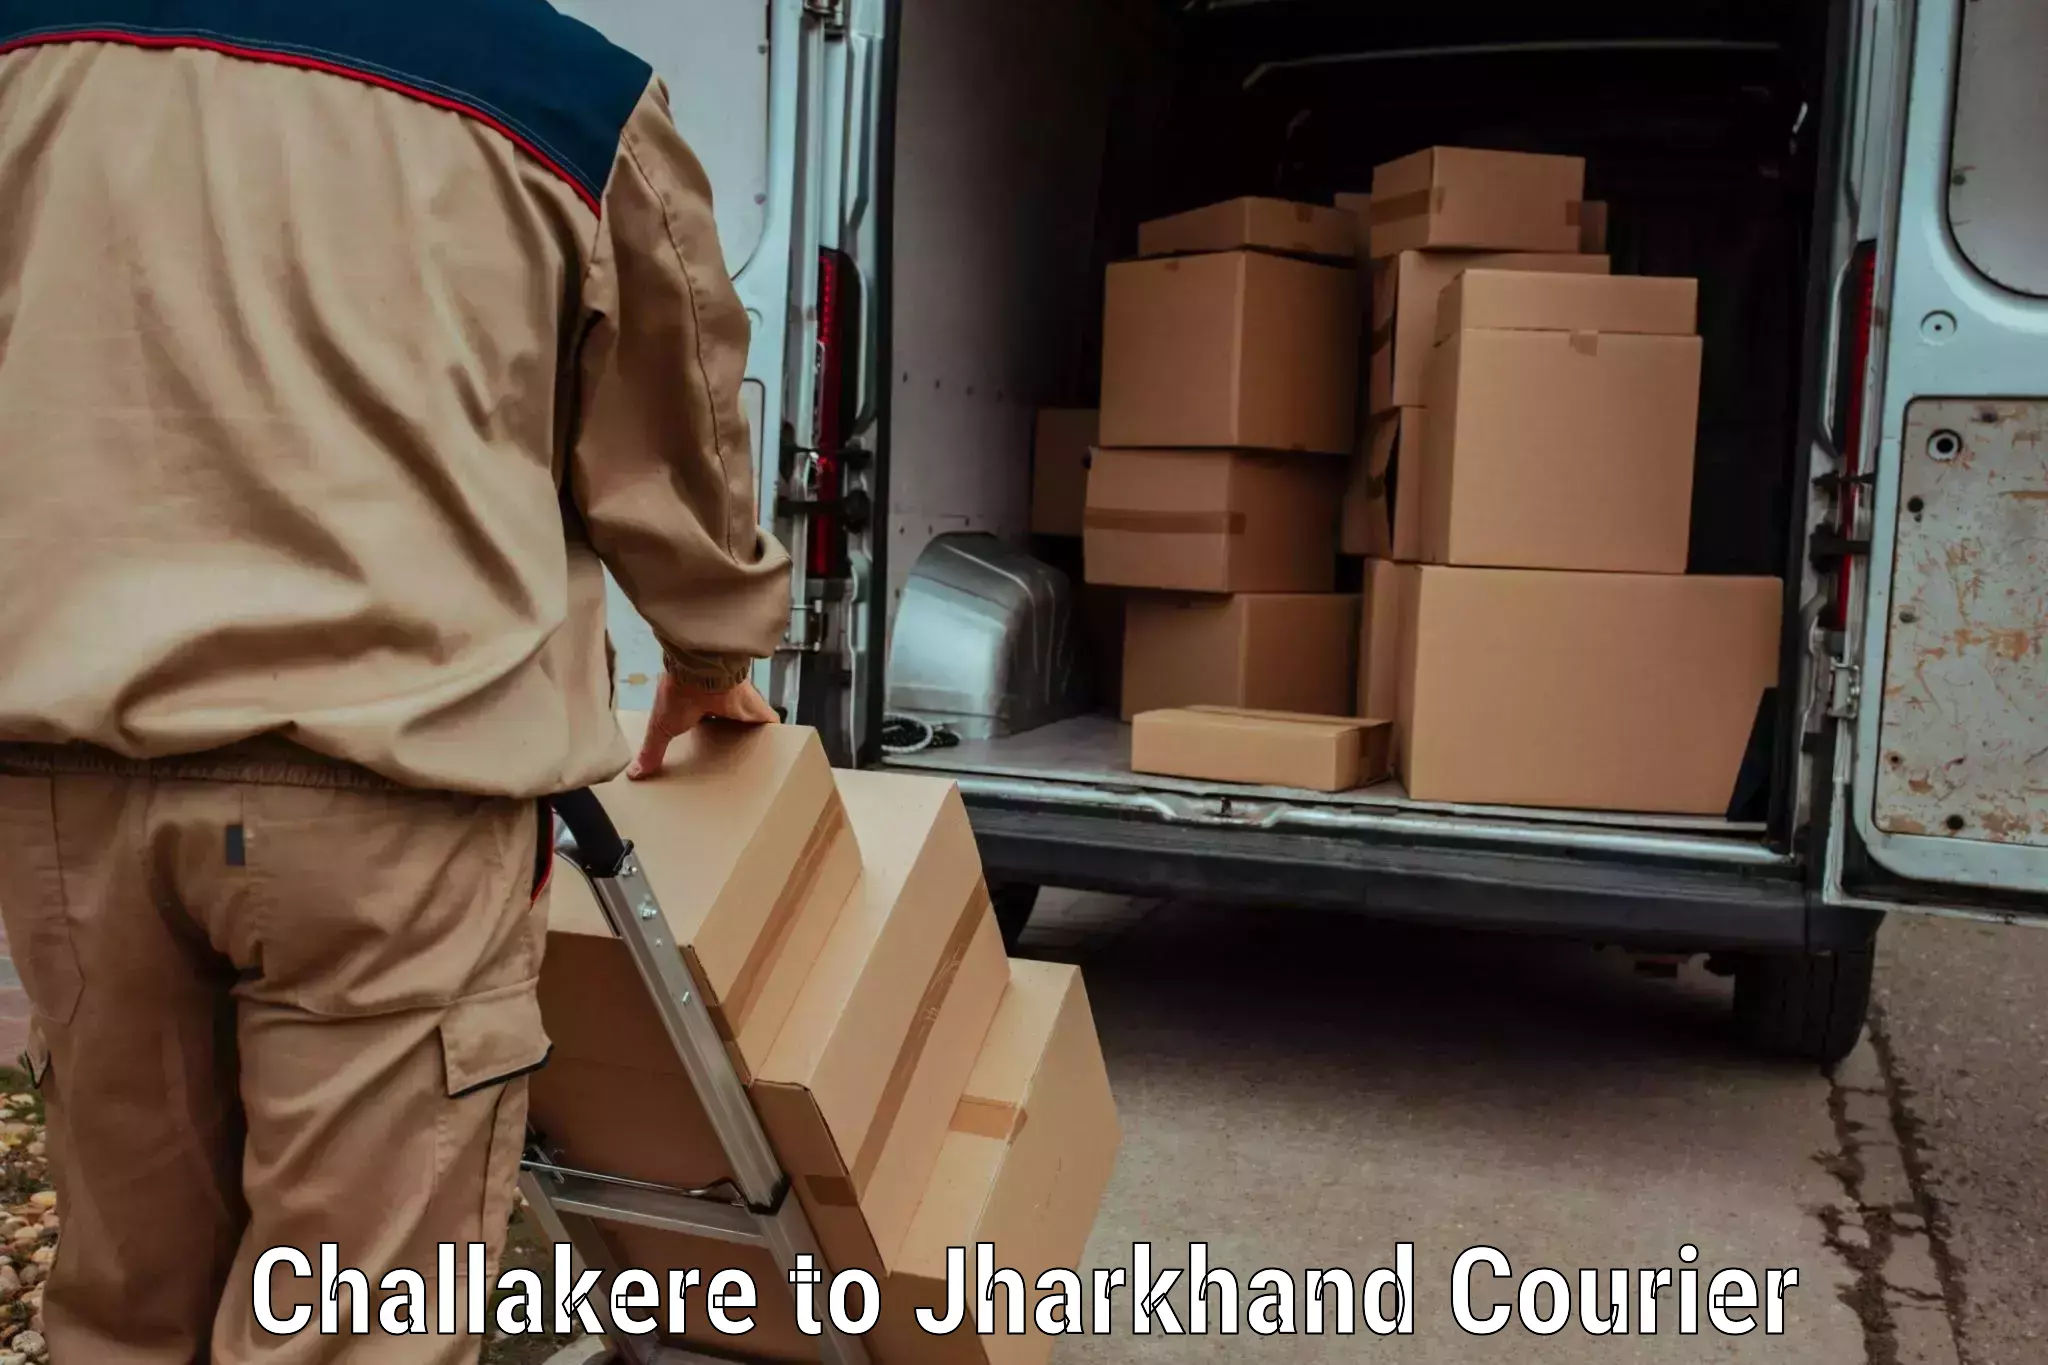 24/7 courier service Challakere to Bokaro Steel City